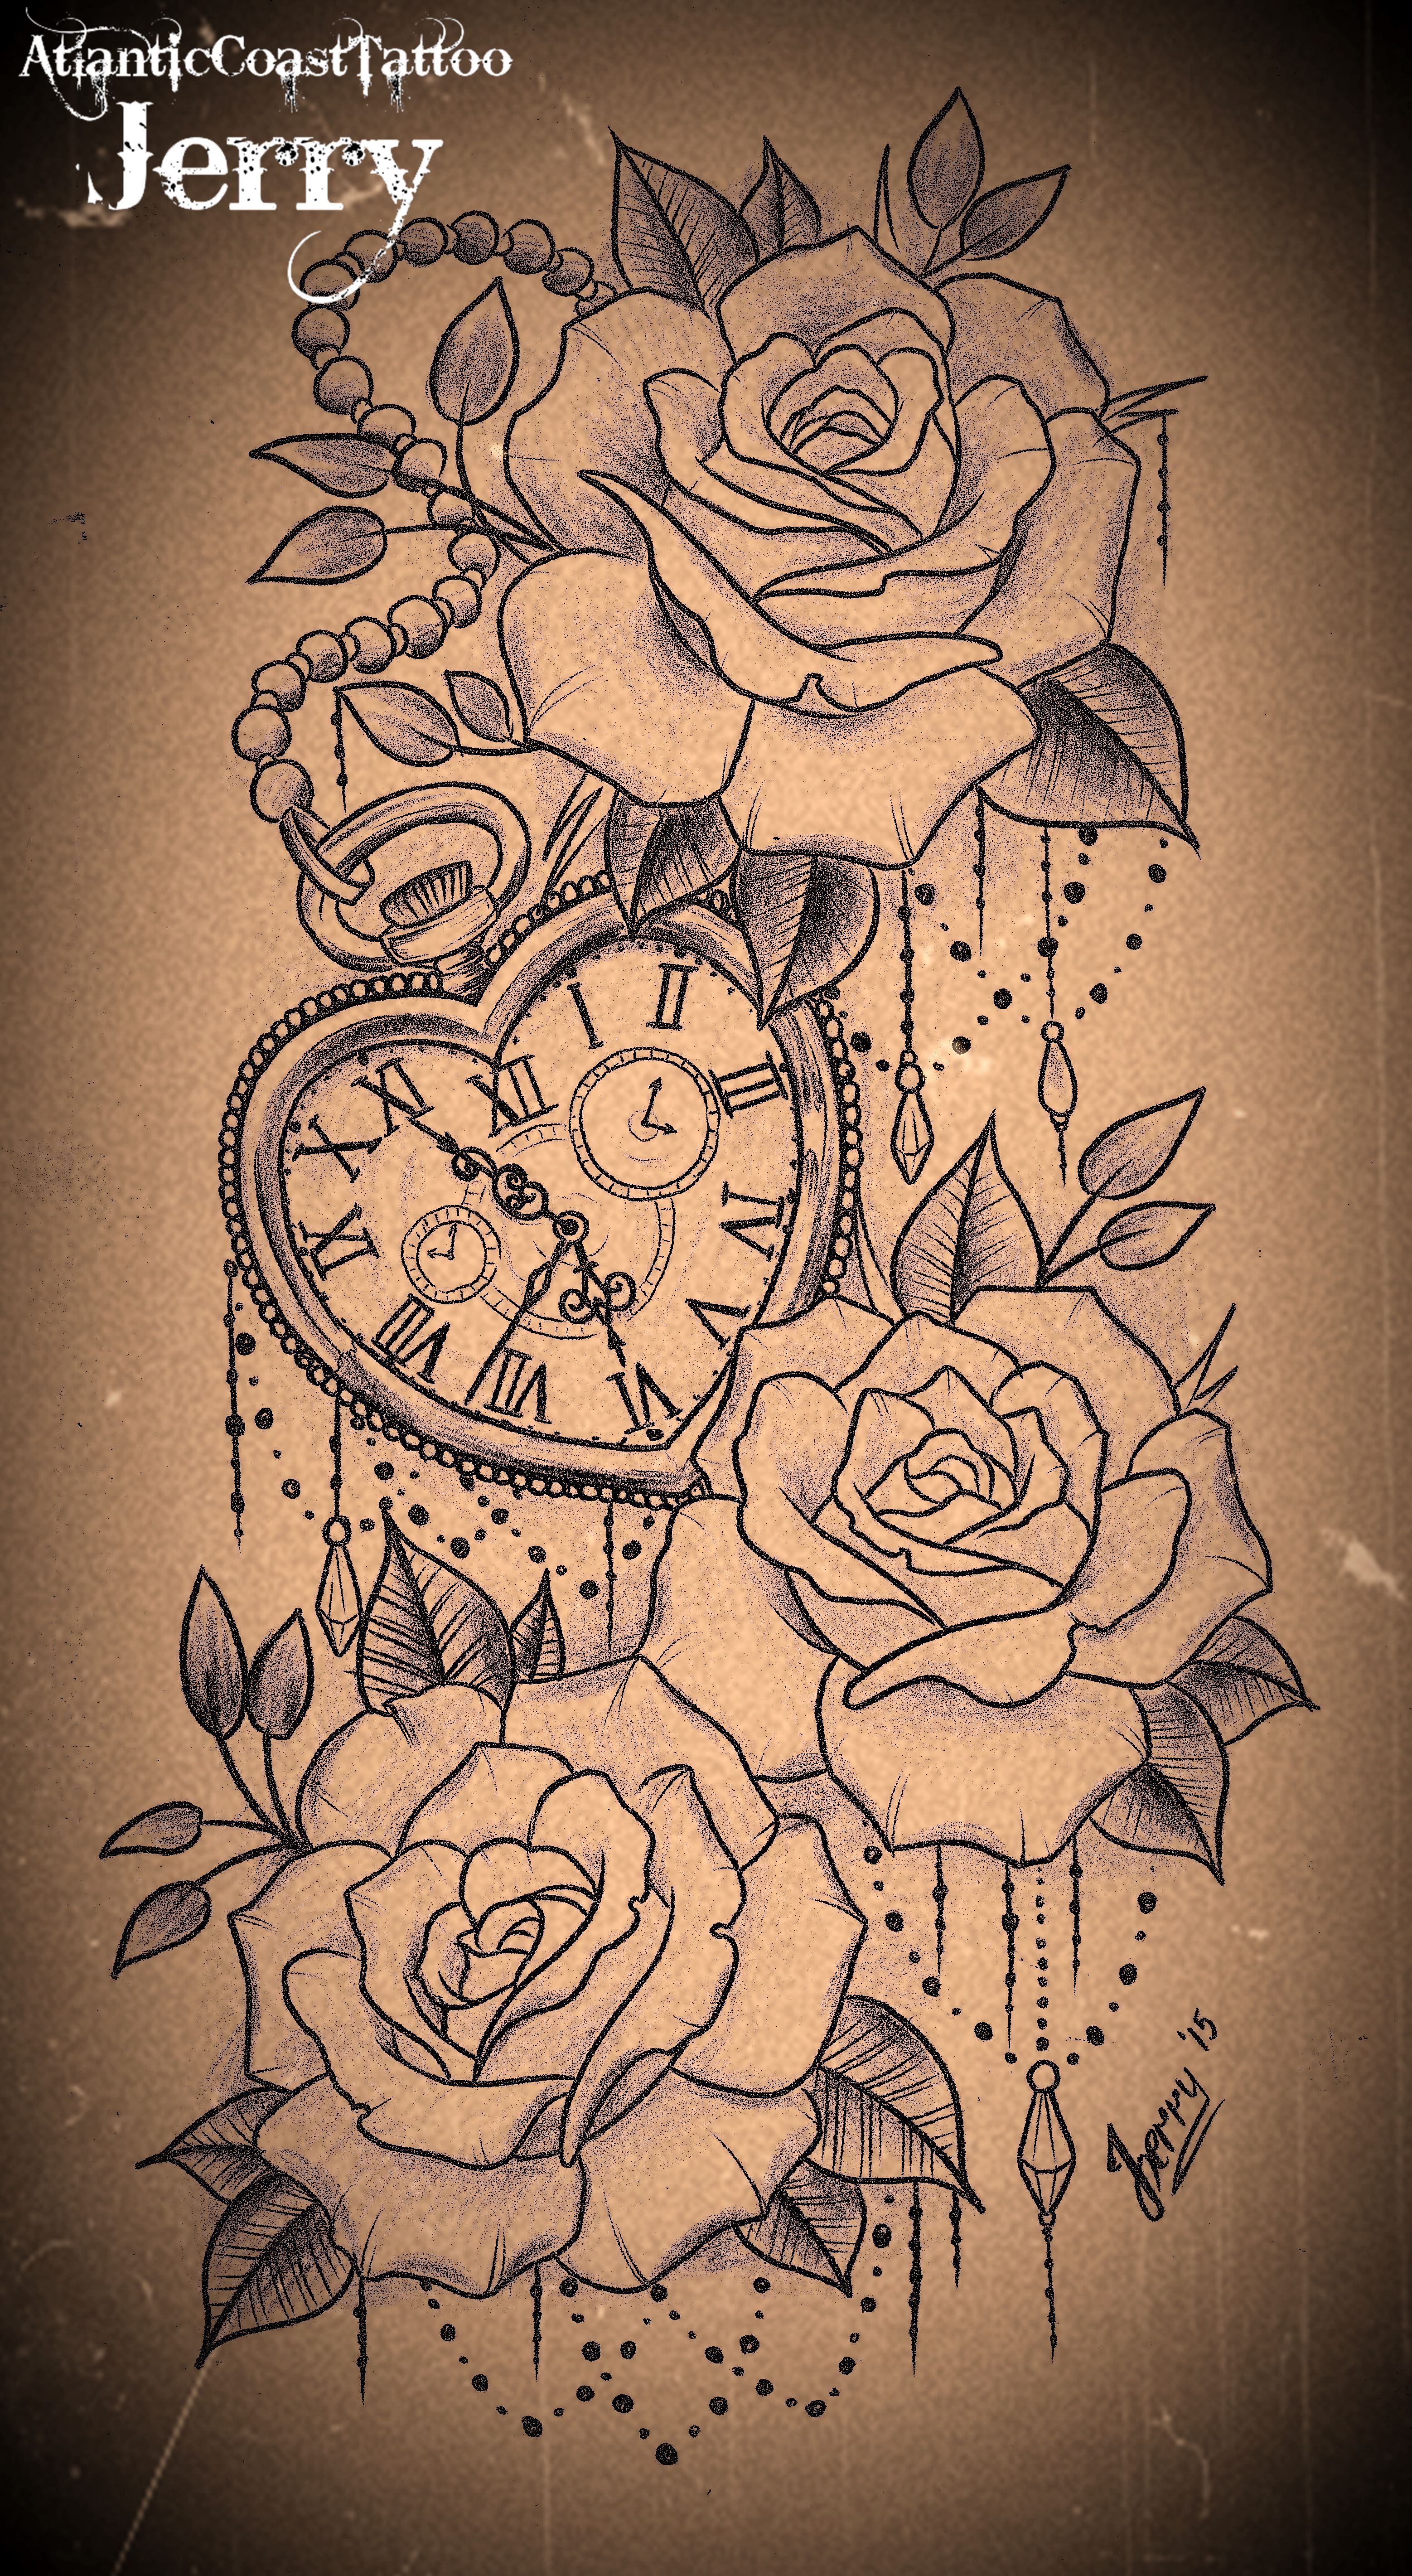 heart shaped pocket watch and roses tattoo design.